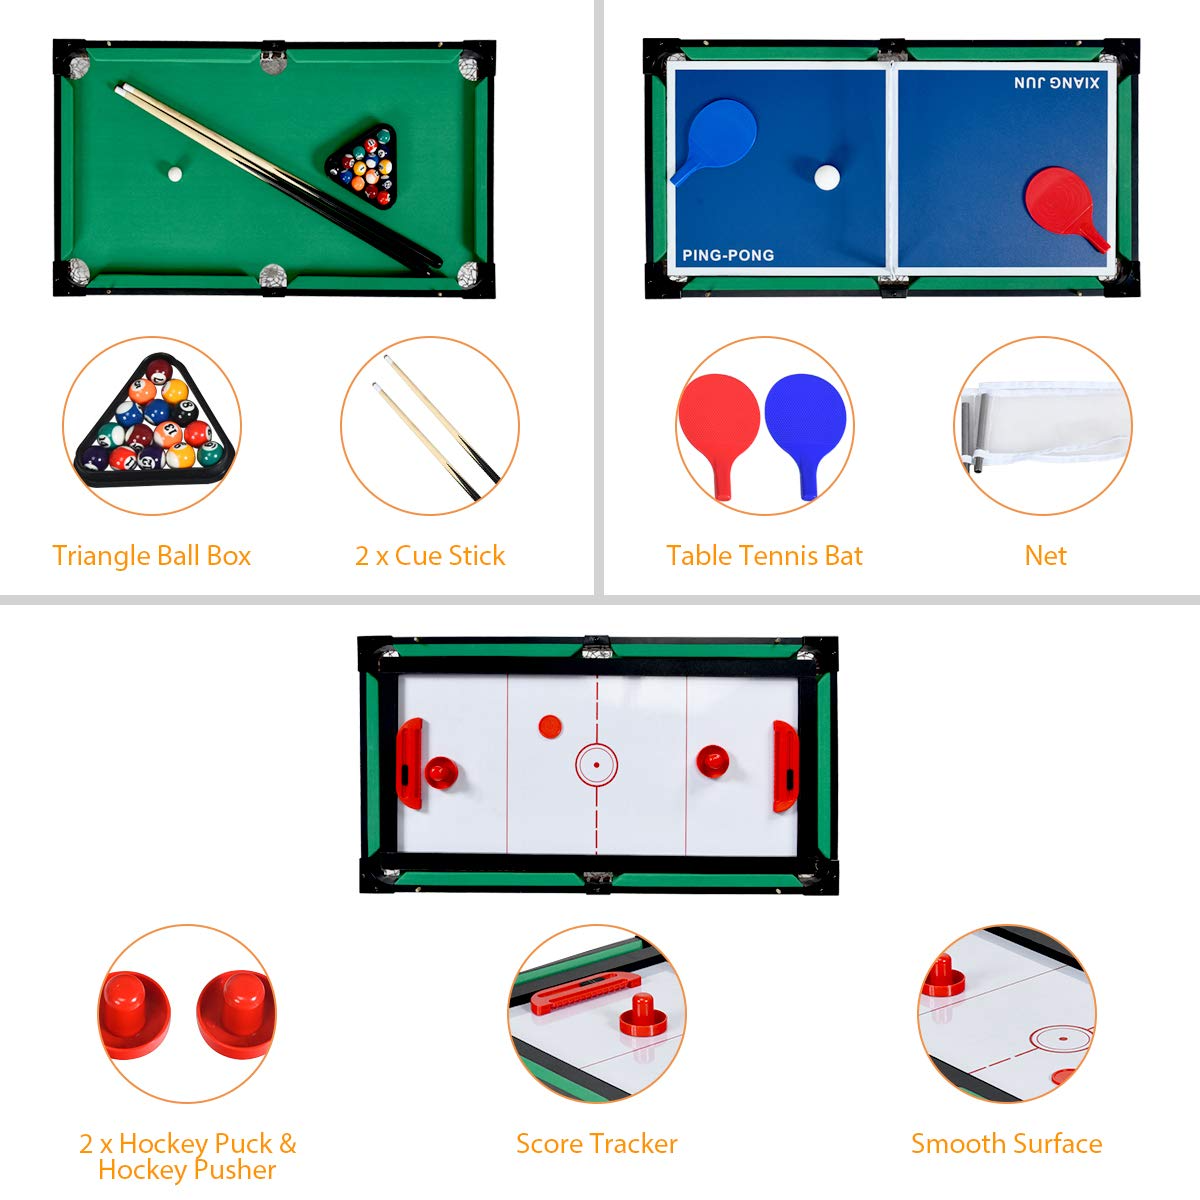 Giantex 4-in-1 Combination Game Table with Soccer